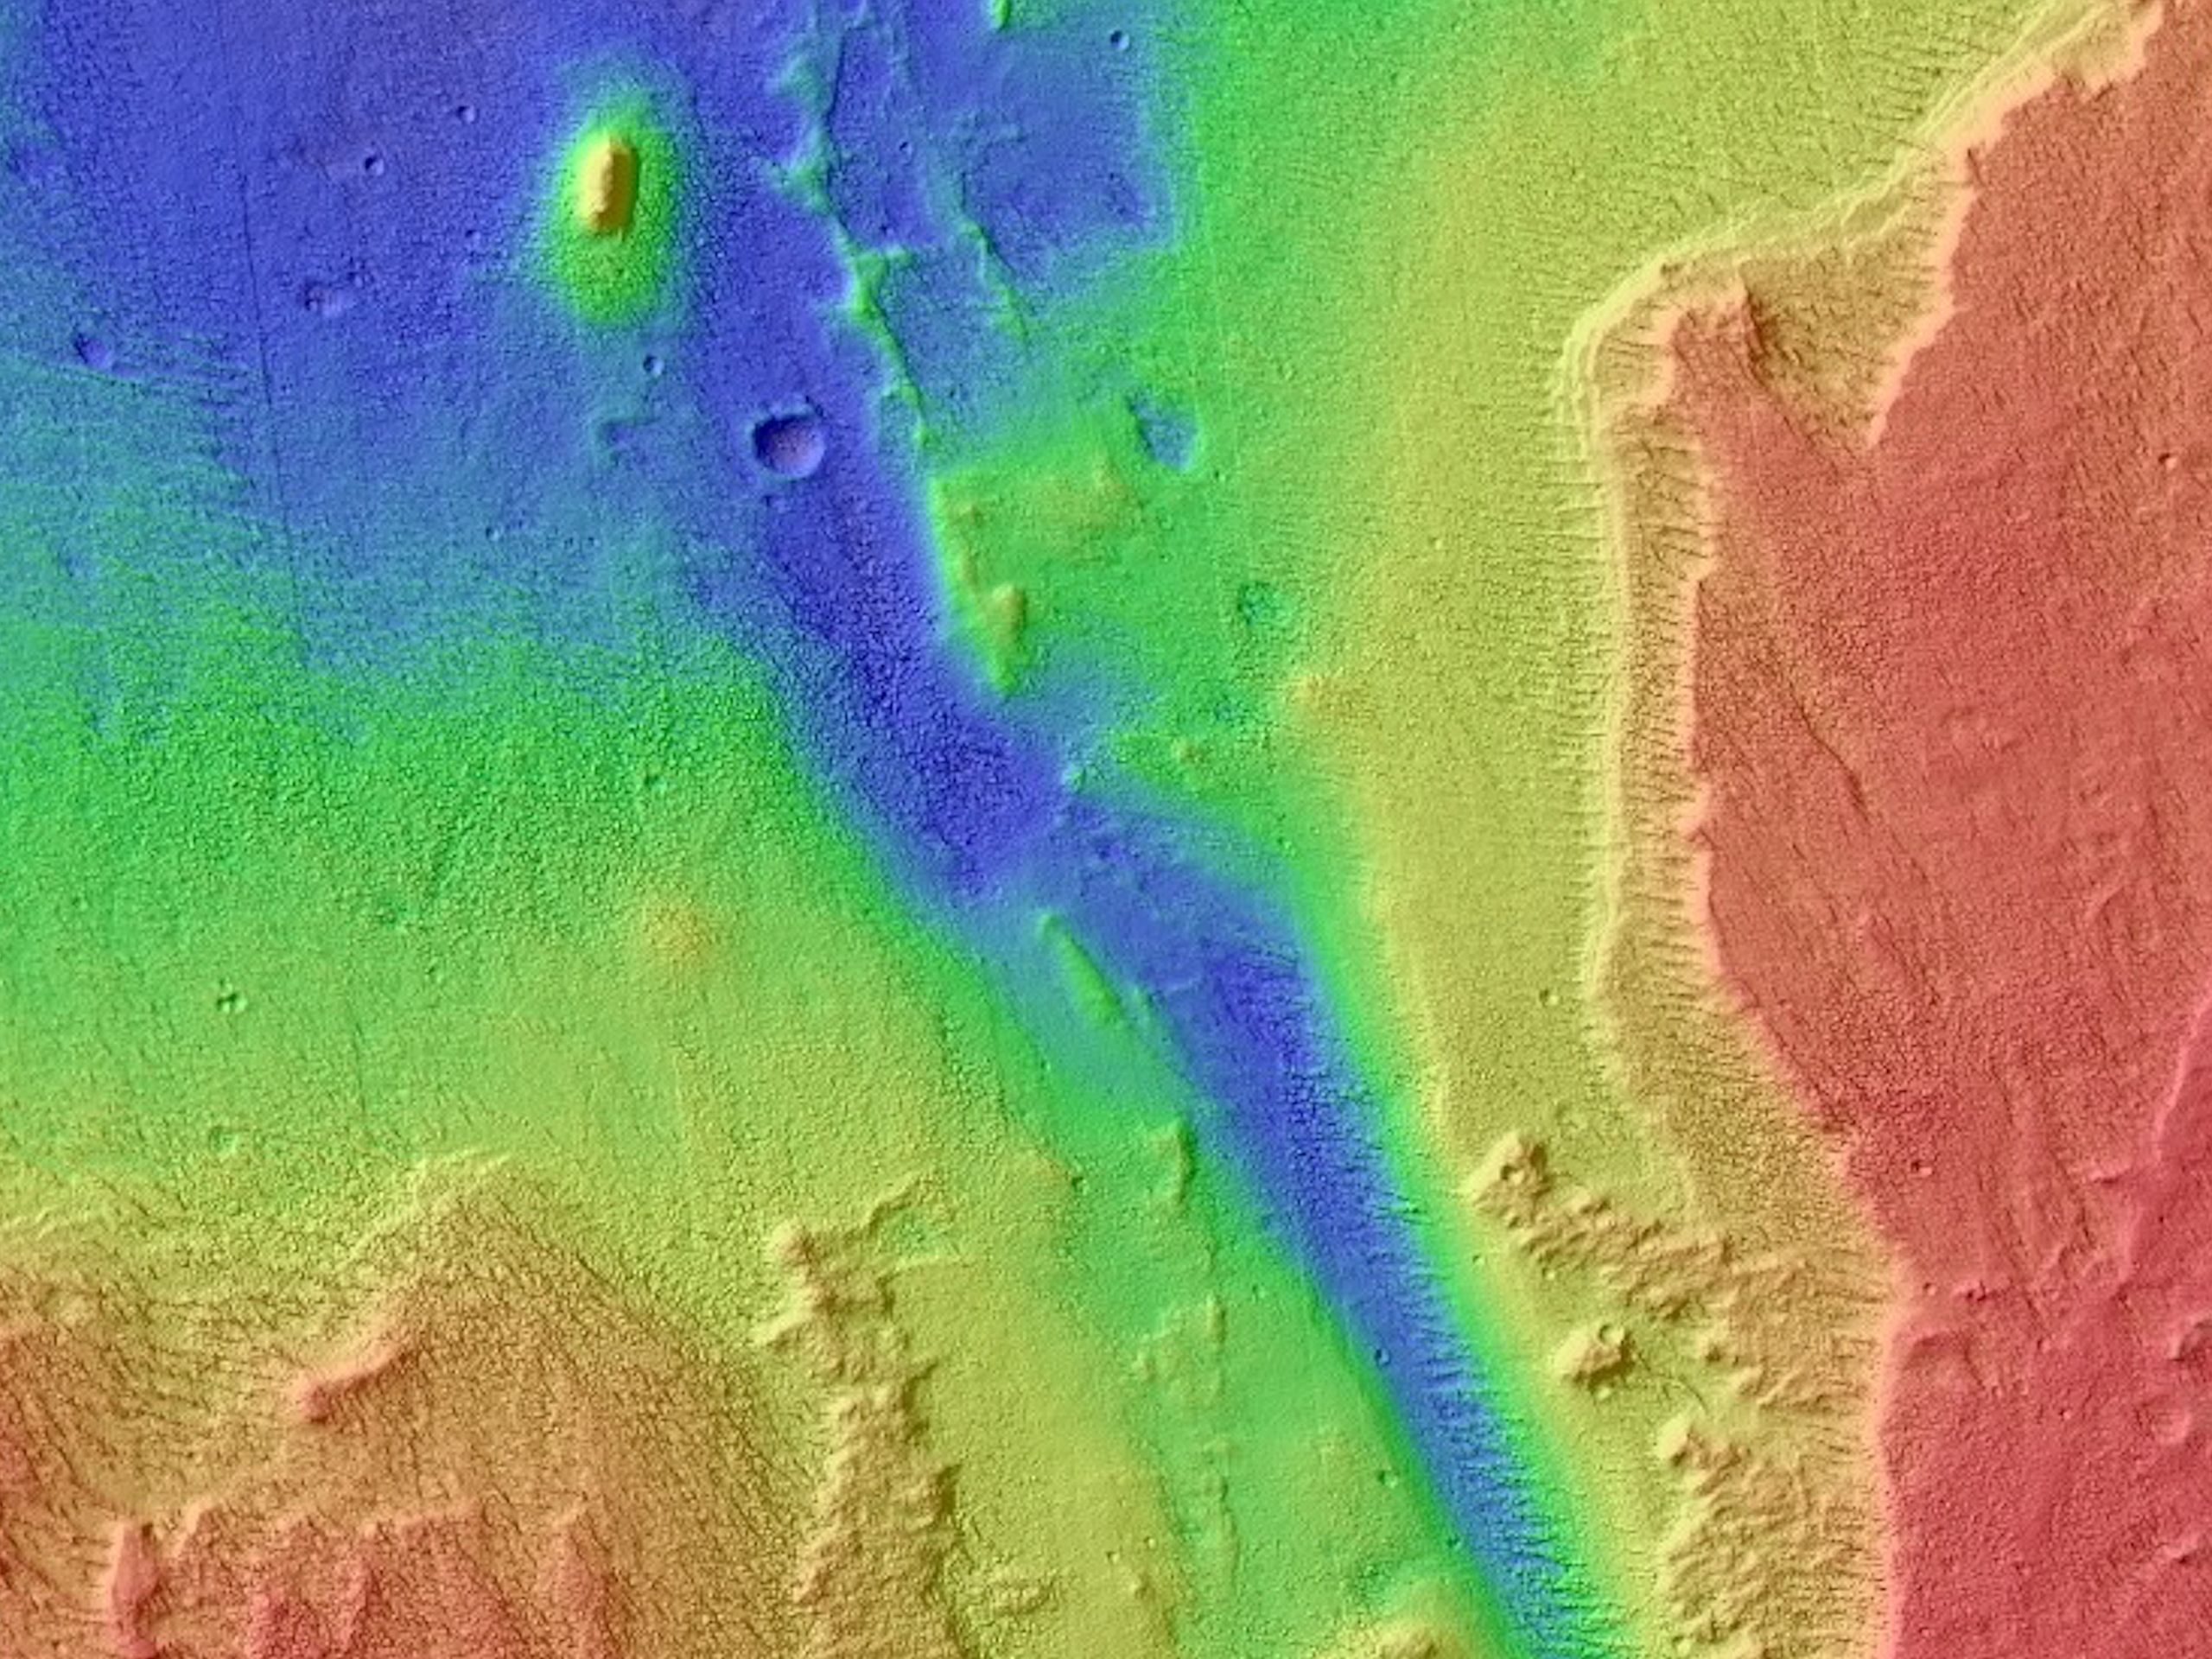 A Possible Landing Site for the ExoMars Rover at Hypanis Valles